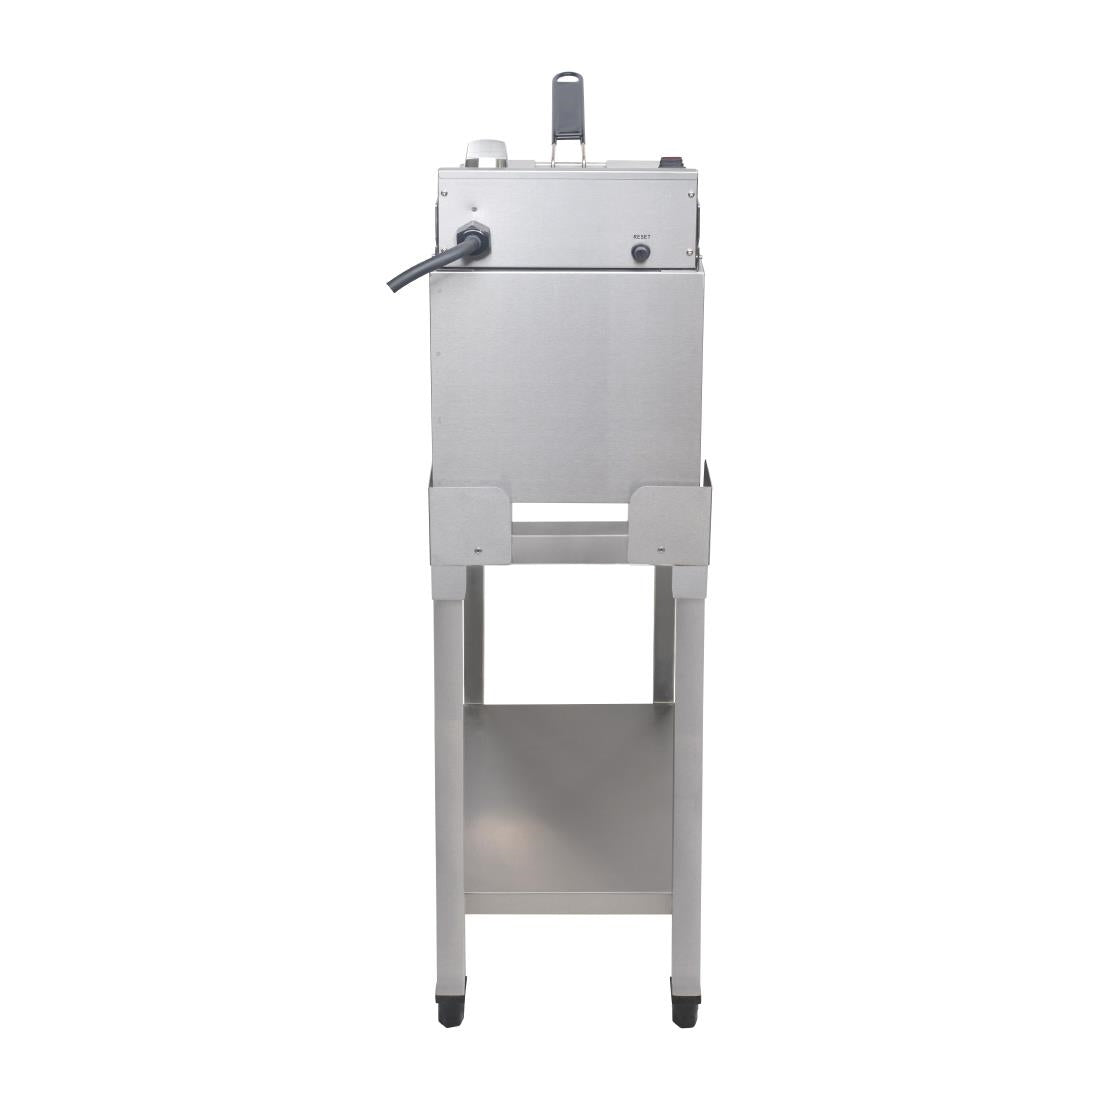 DF501 Buffalo Stand for Single Fryer (FC374 & FC376) JD Catering Equipment Solutions Ltd